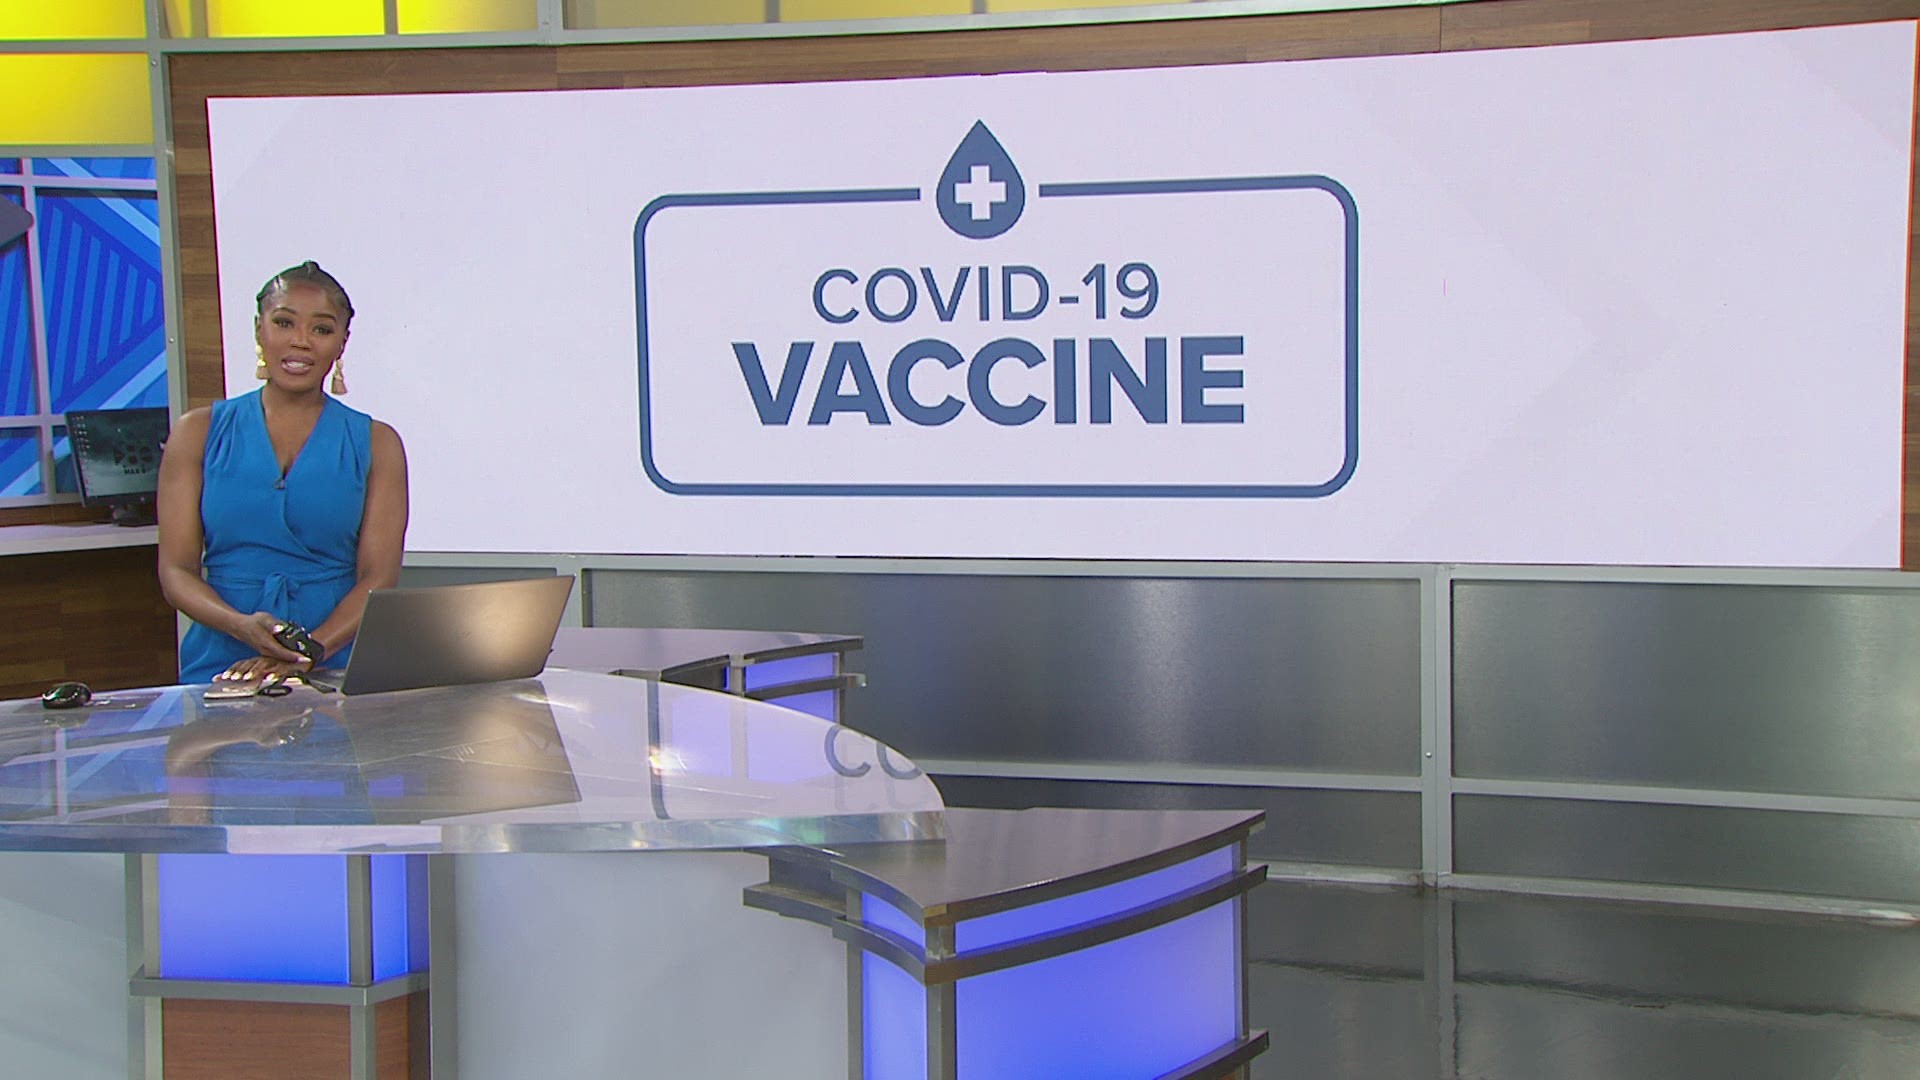 Health officials are expecting the "vaccine rush" to die down now that Texans 16 years old and older are eligible for the vaccine.